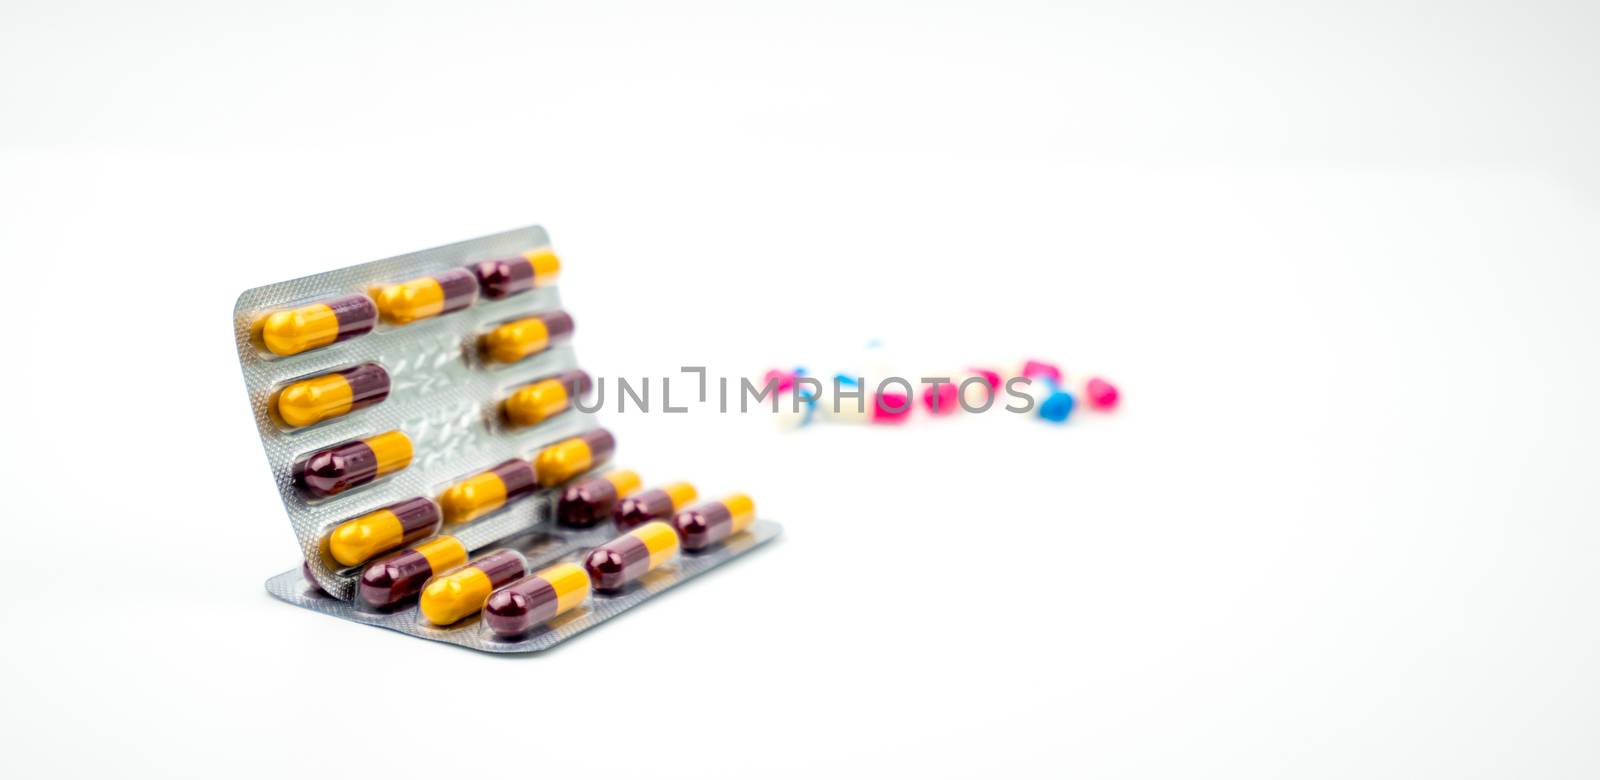 Colorful of antibiotic capsules pills on blurred background with copy space. Drug resistance, antibiotic drug use with reasonable, health policy and health insurance concept. Pharmaceutical industry. Pharmacy background.